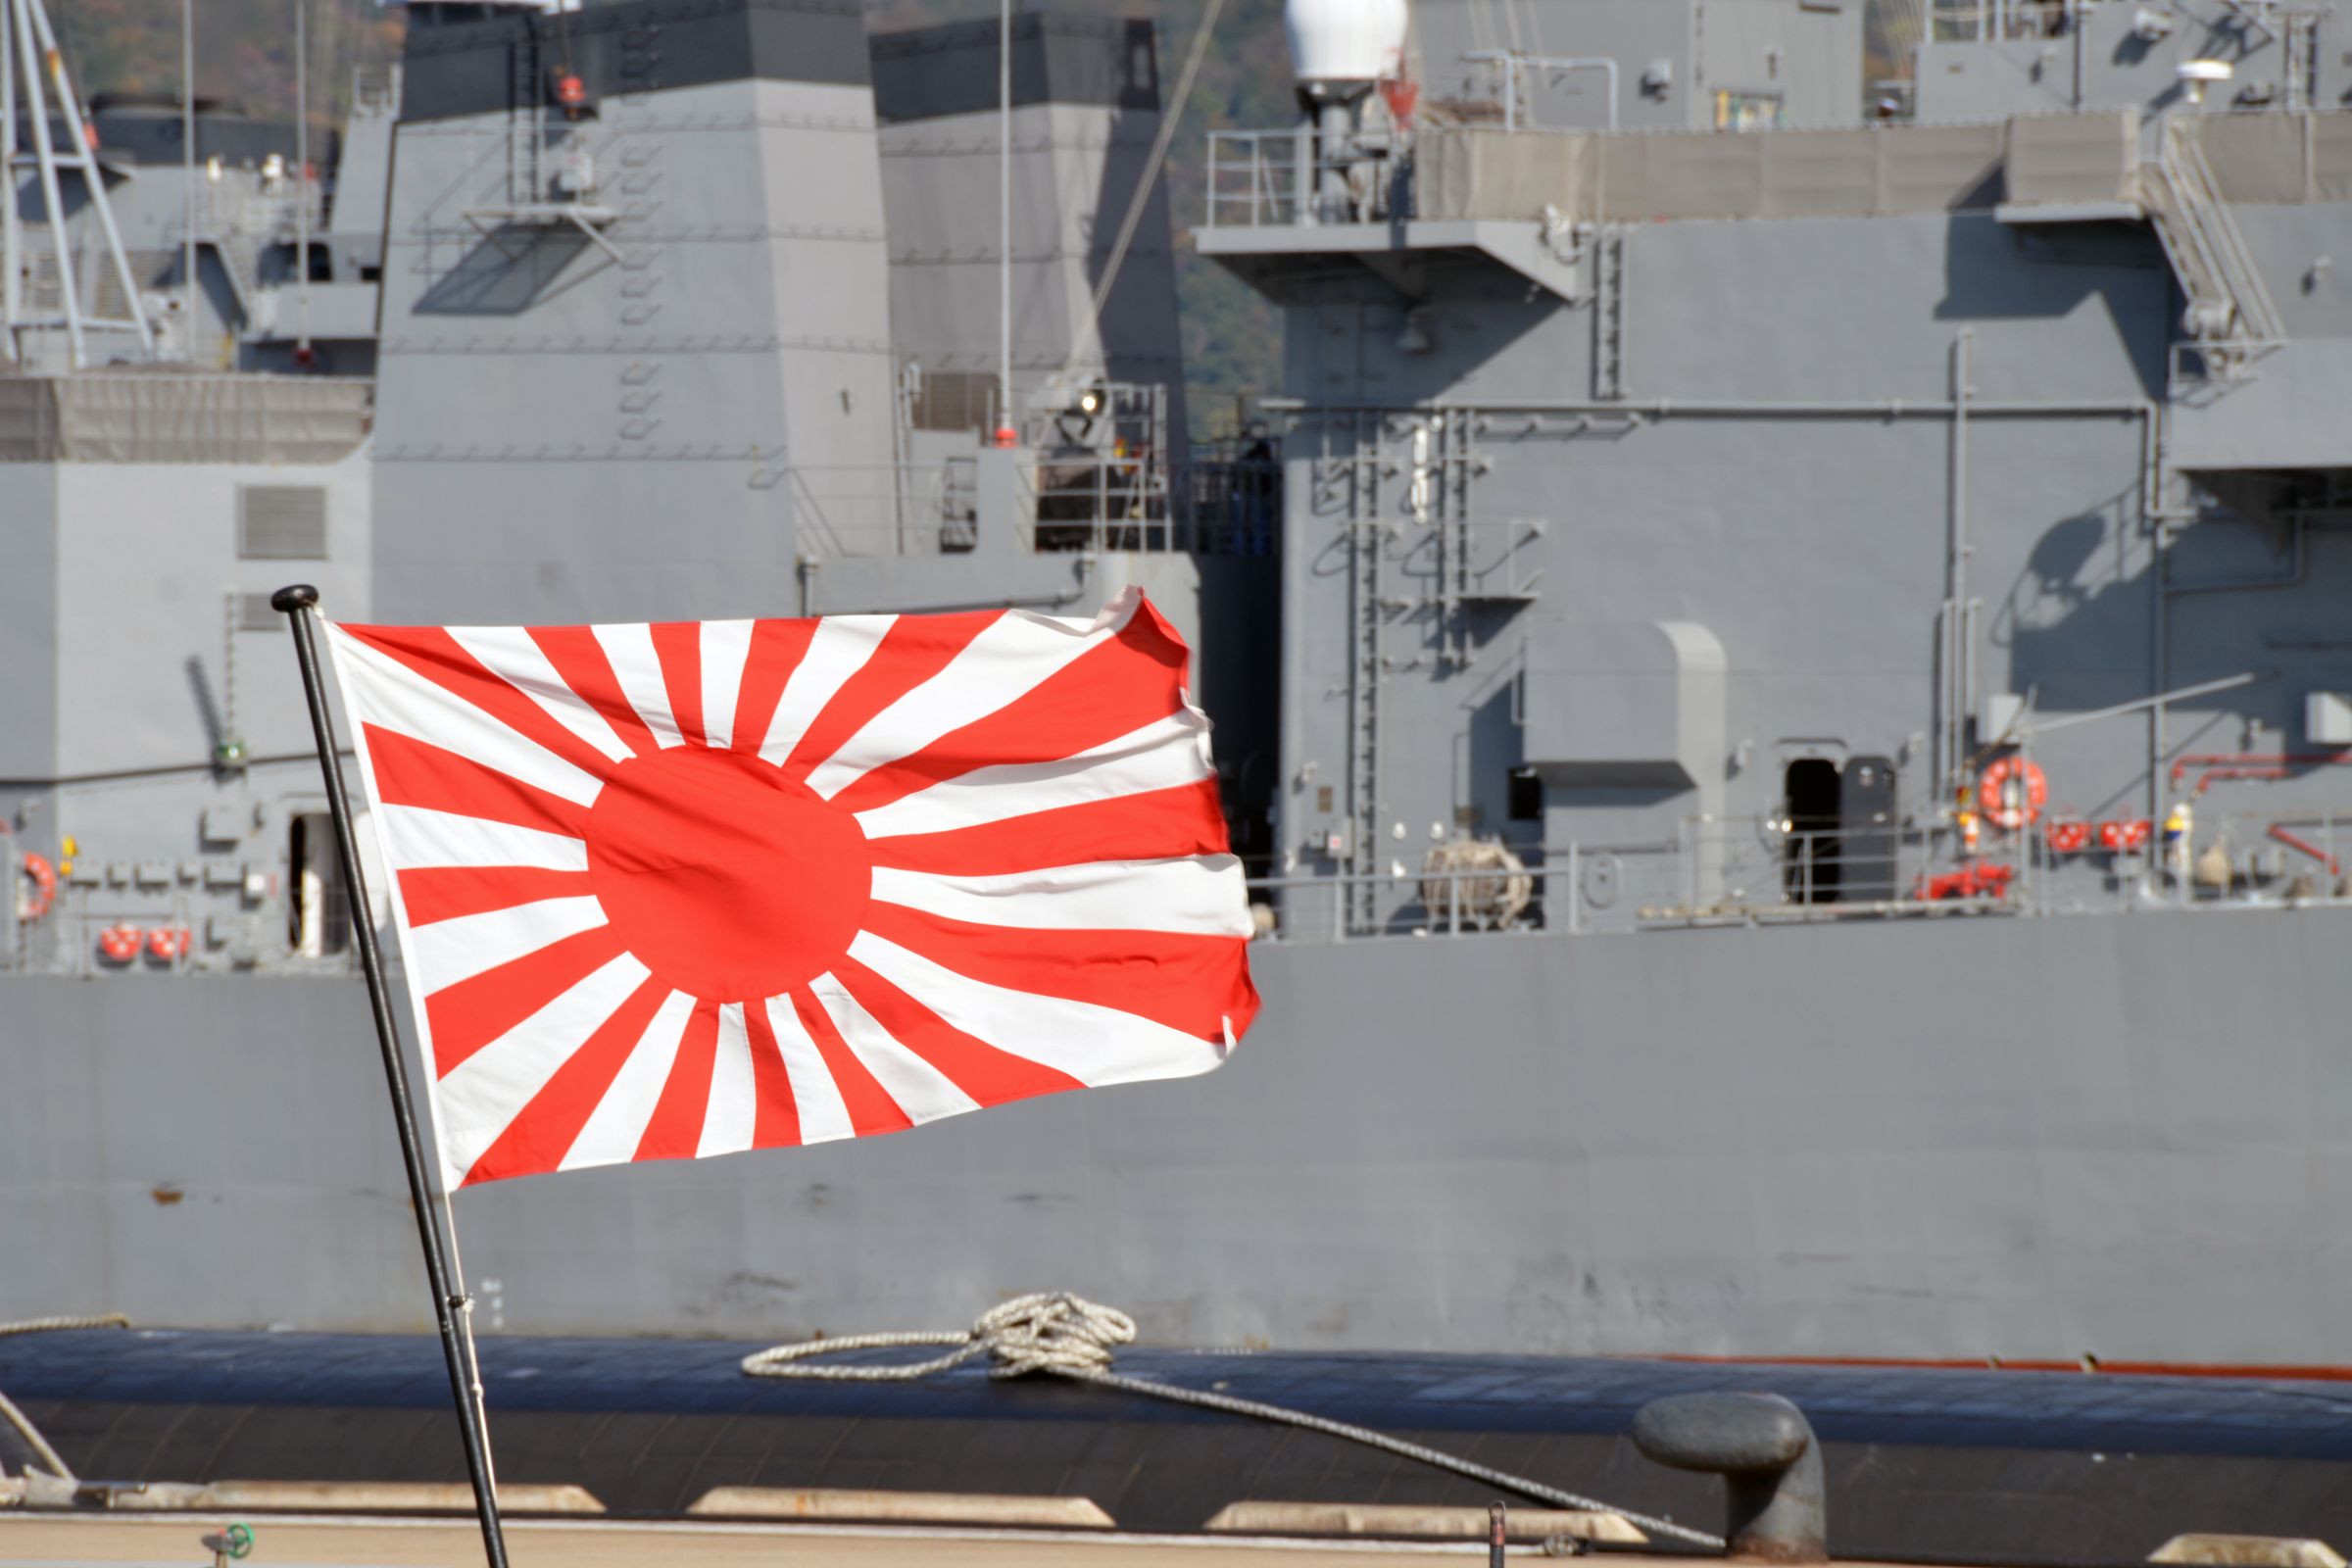 Japan Flag Meaning